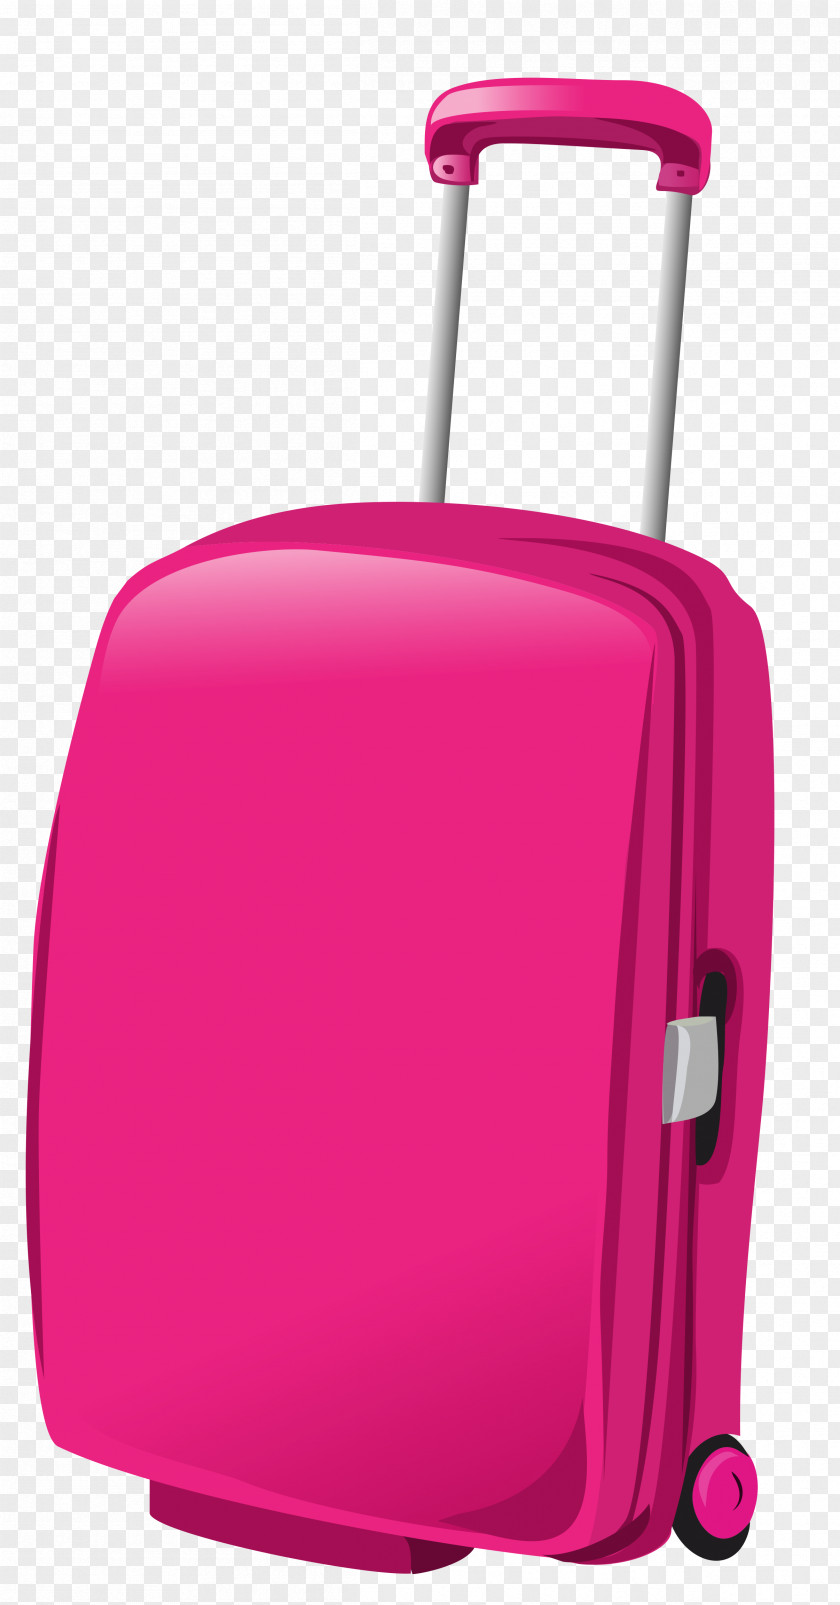 Luggage Baggage Travel Suitcase Clip Art PNG